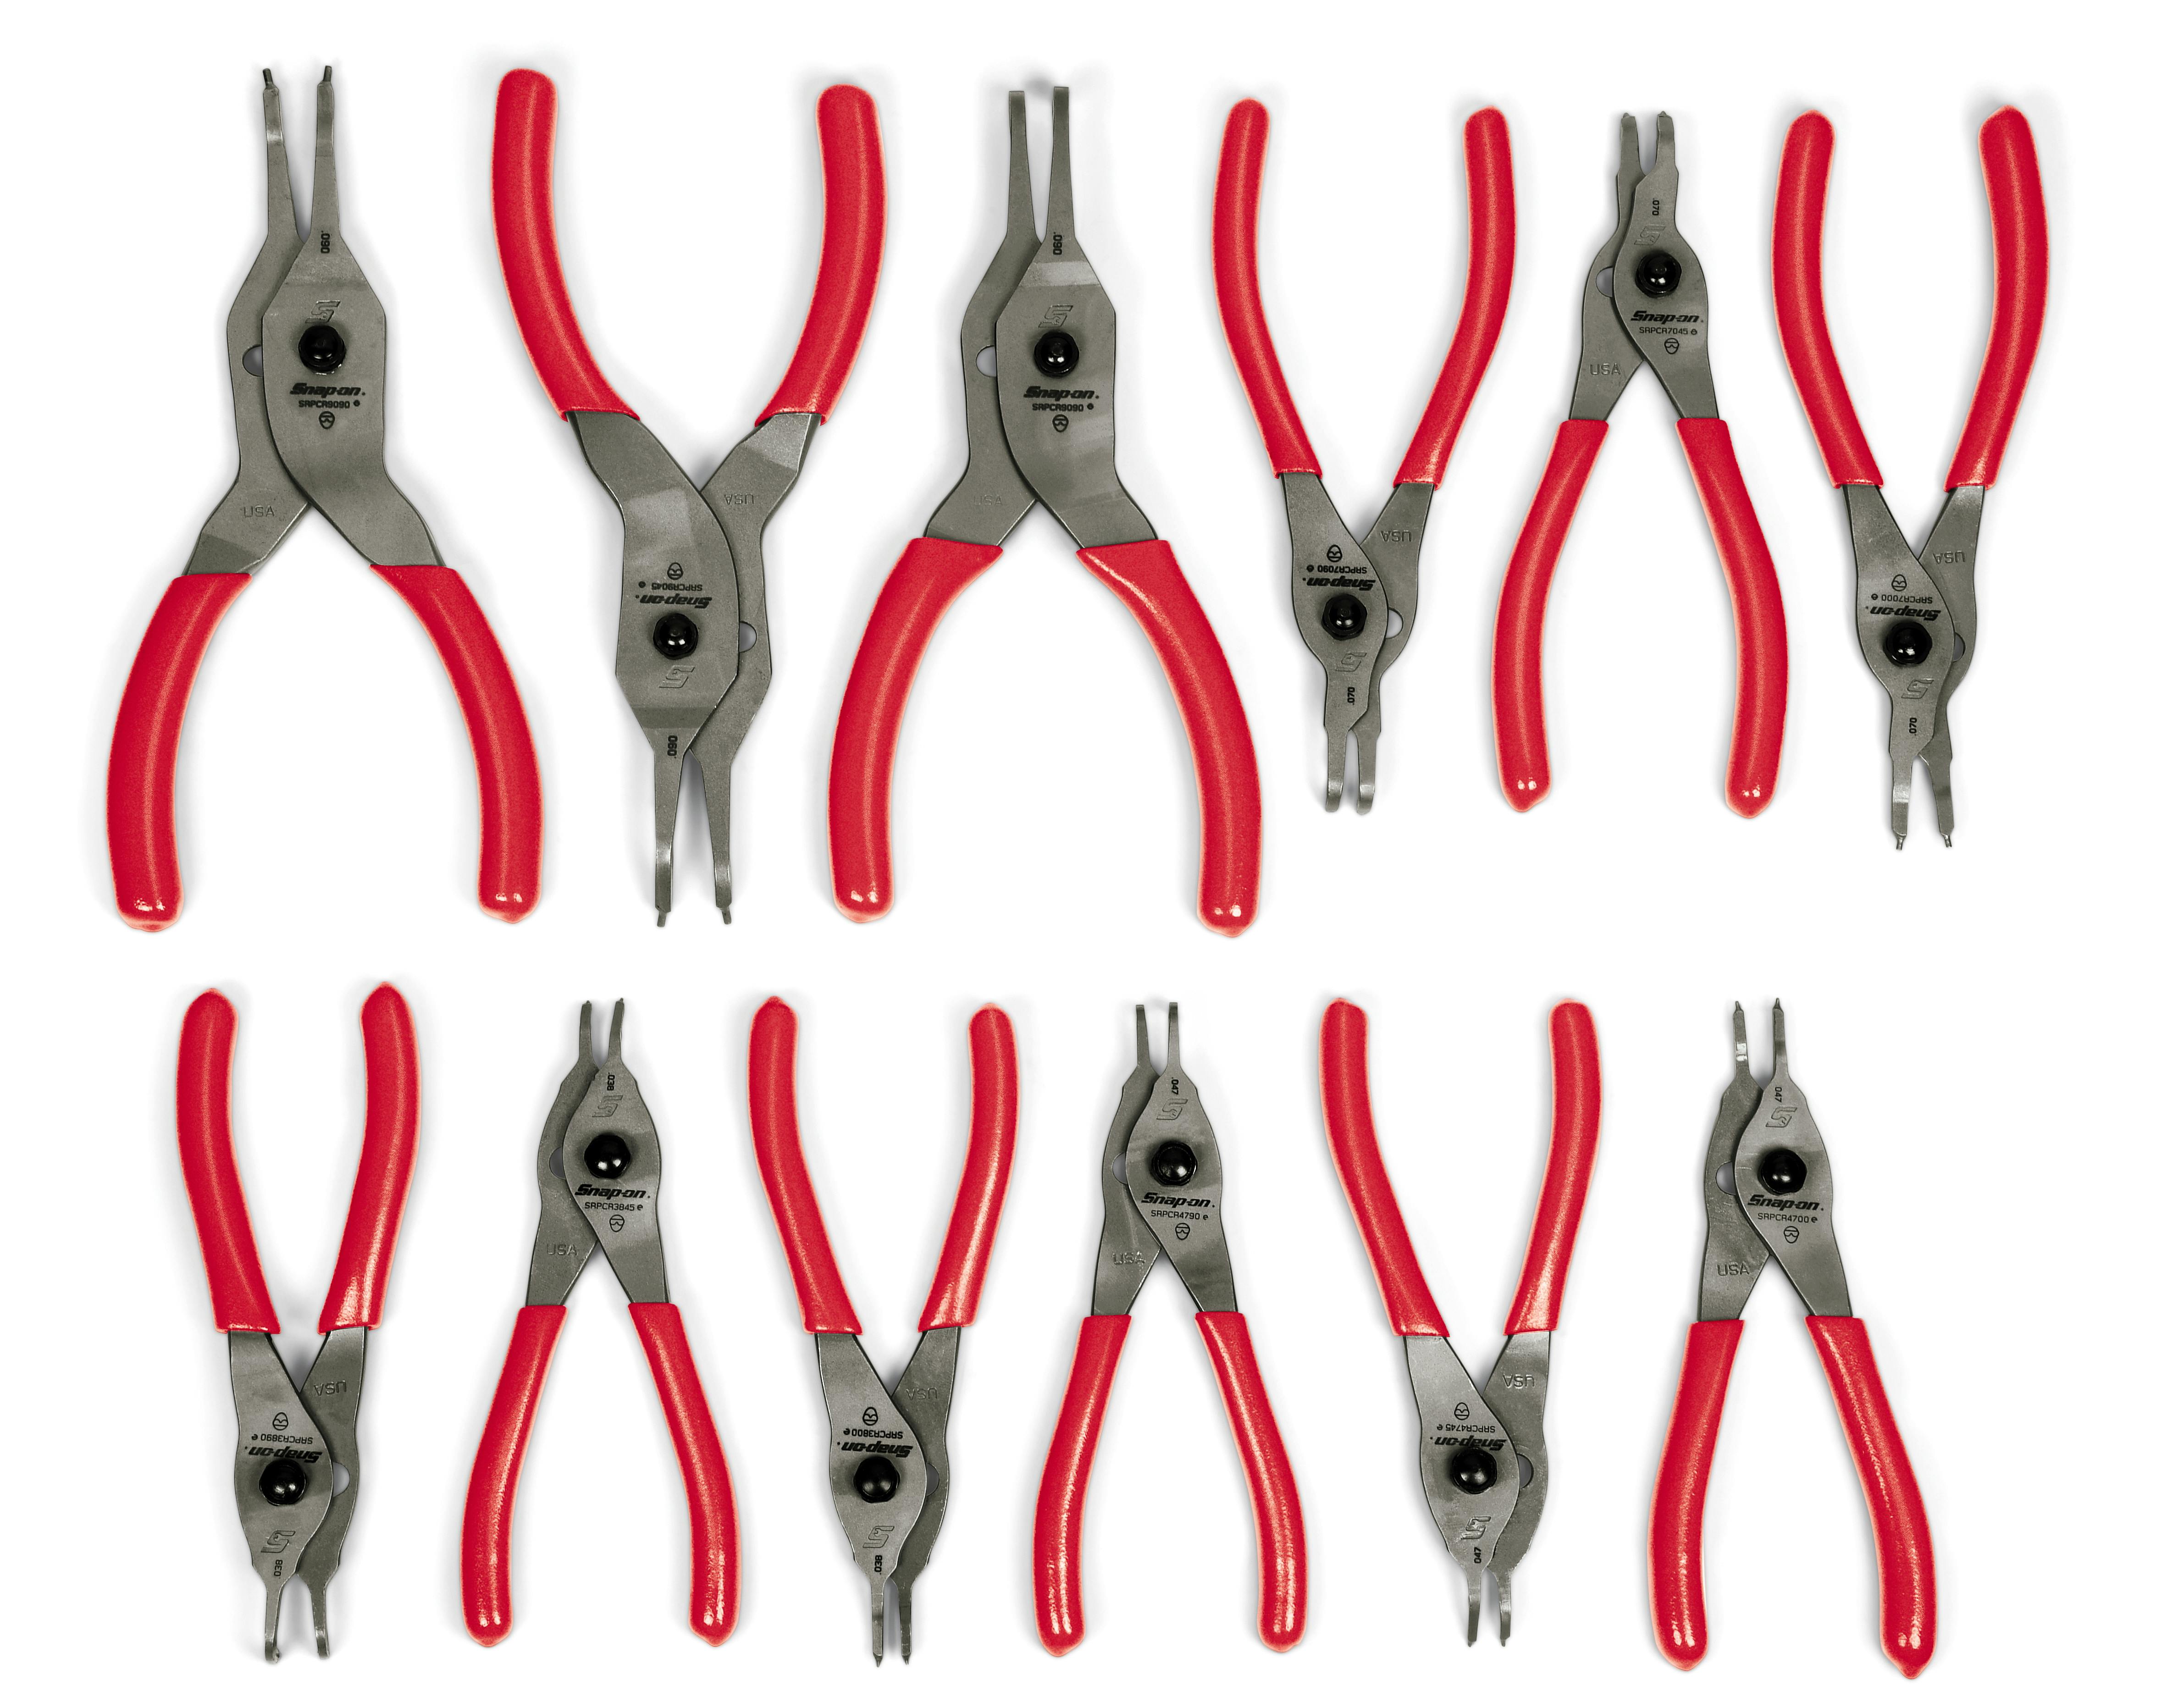 12 pc Snap Ring Pliers Set (Red)